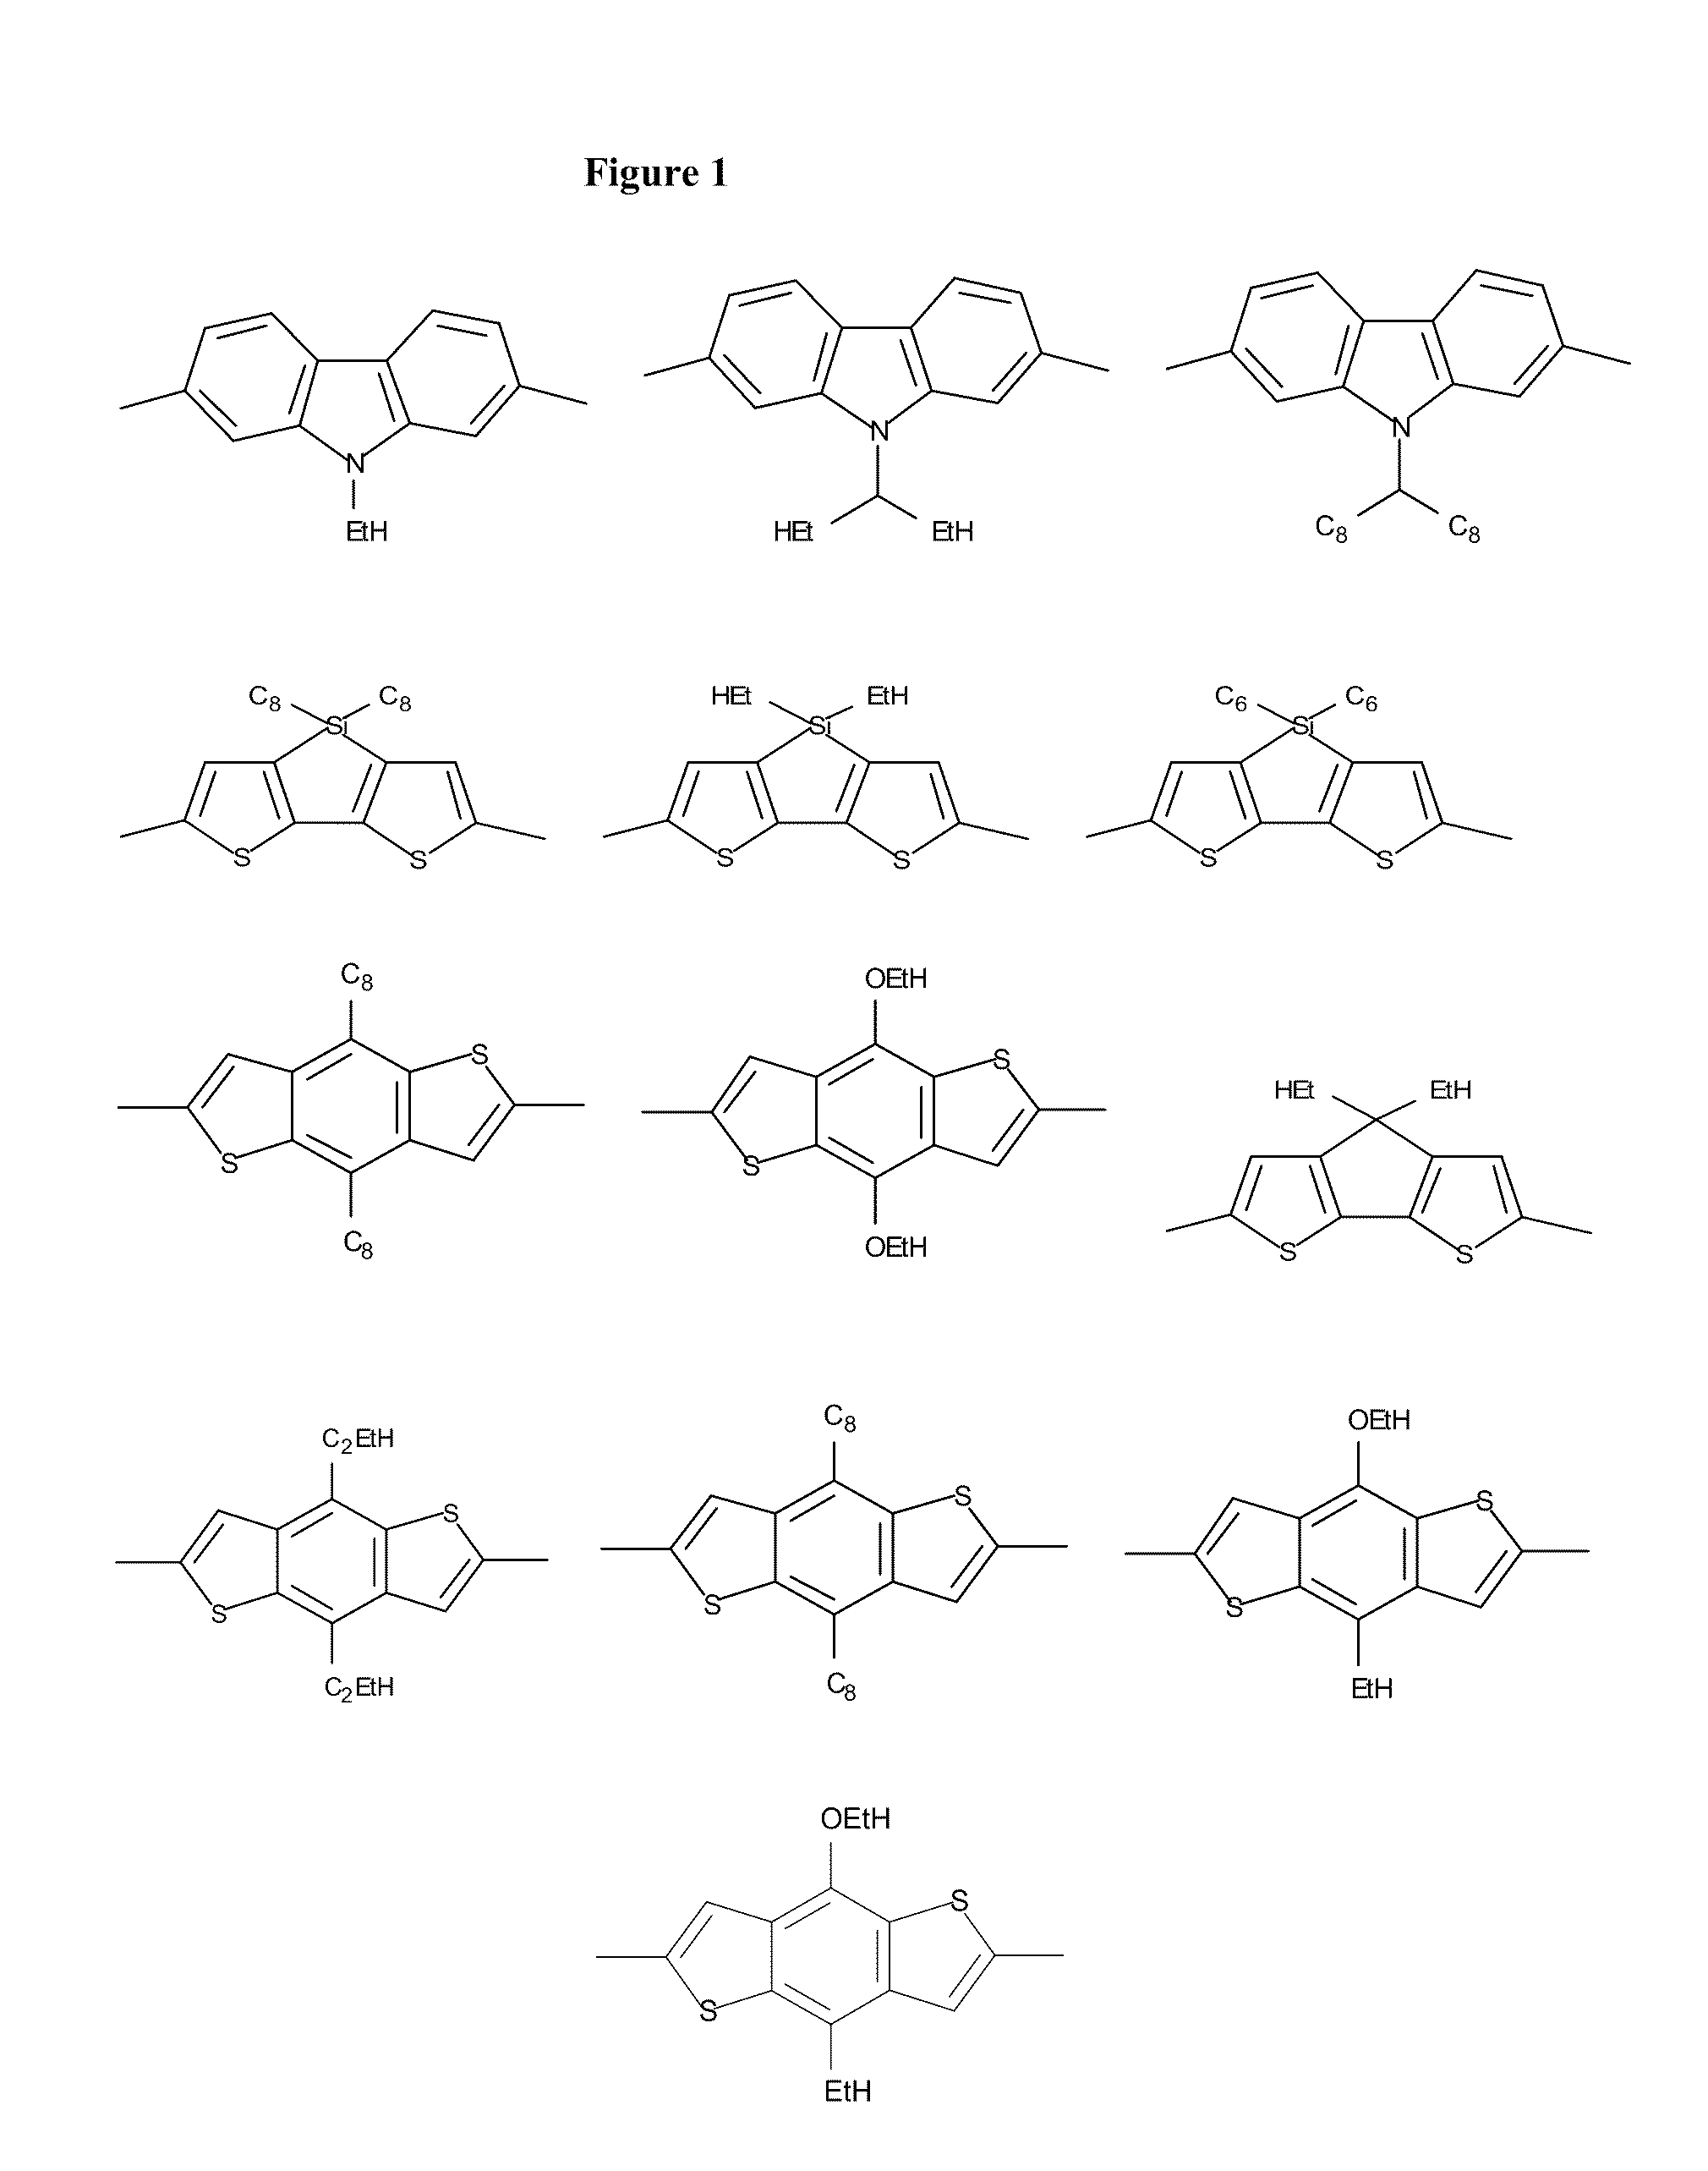 Organic electronic devices and polymers, including photovoltaic cells and diketone-based polymers